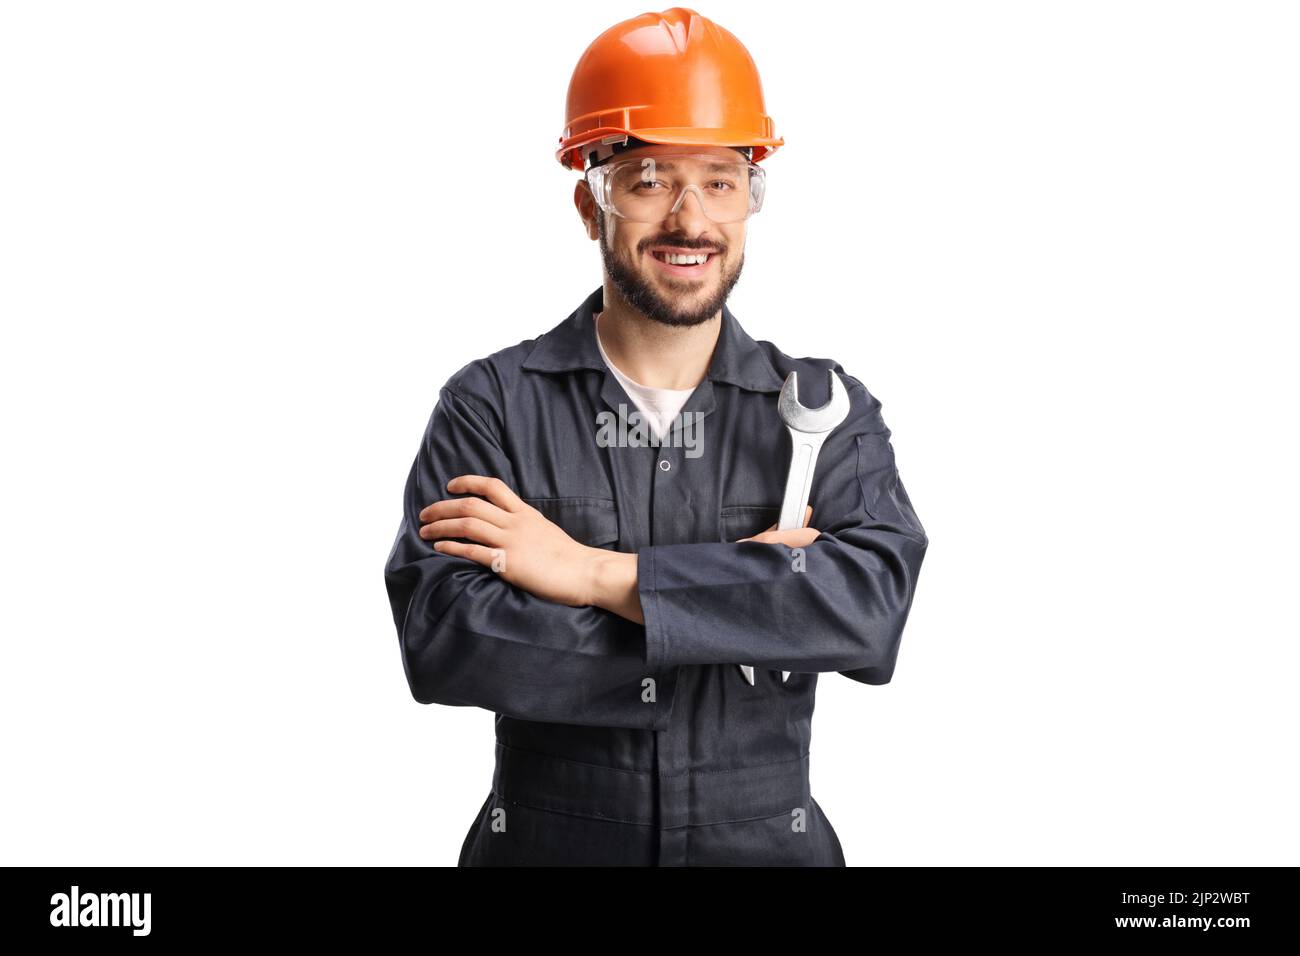 Smiling young worker with an orange hardhat holding a wrench isolated on white background Stock Photo